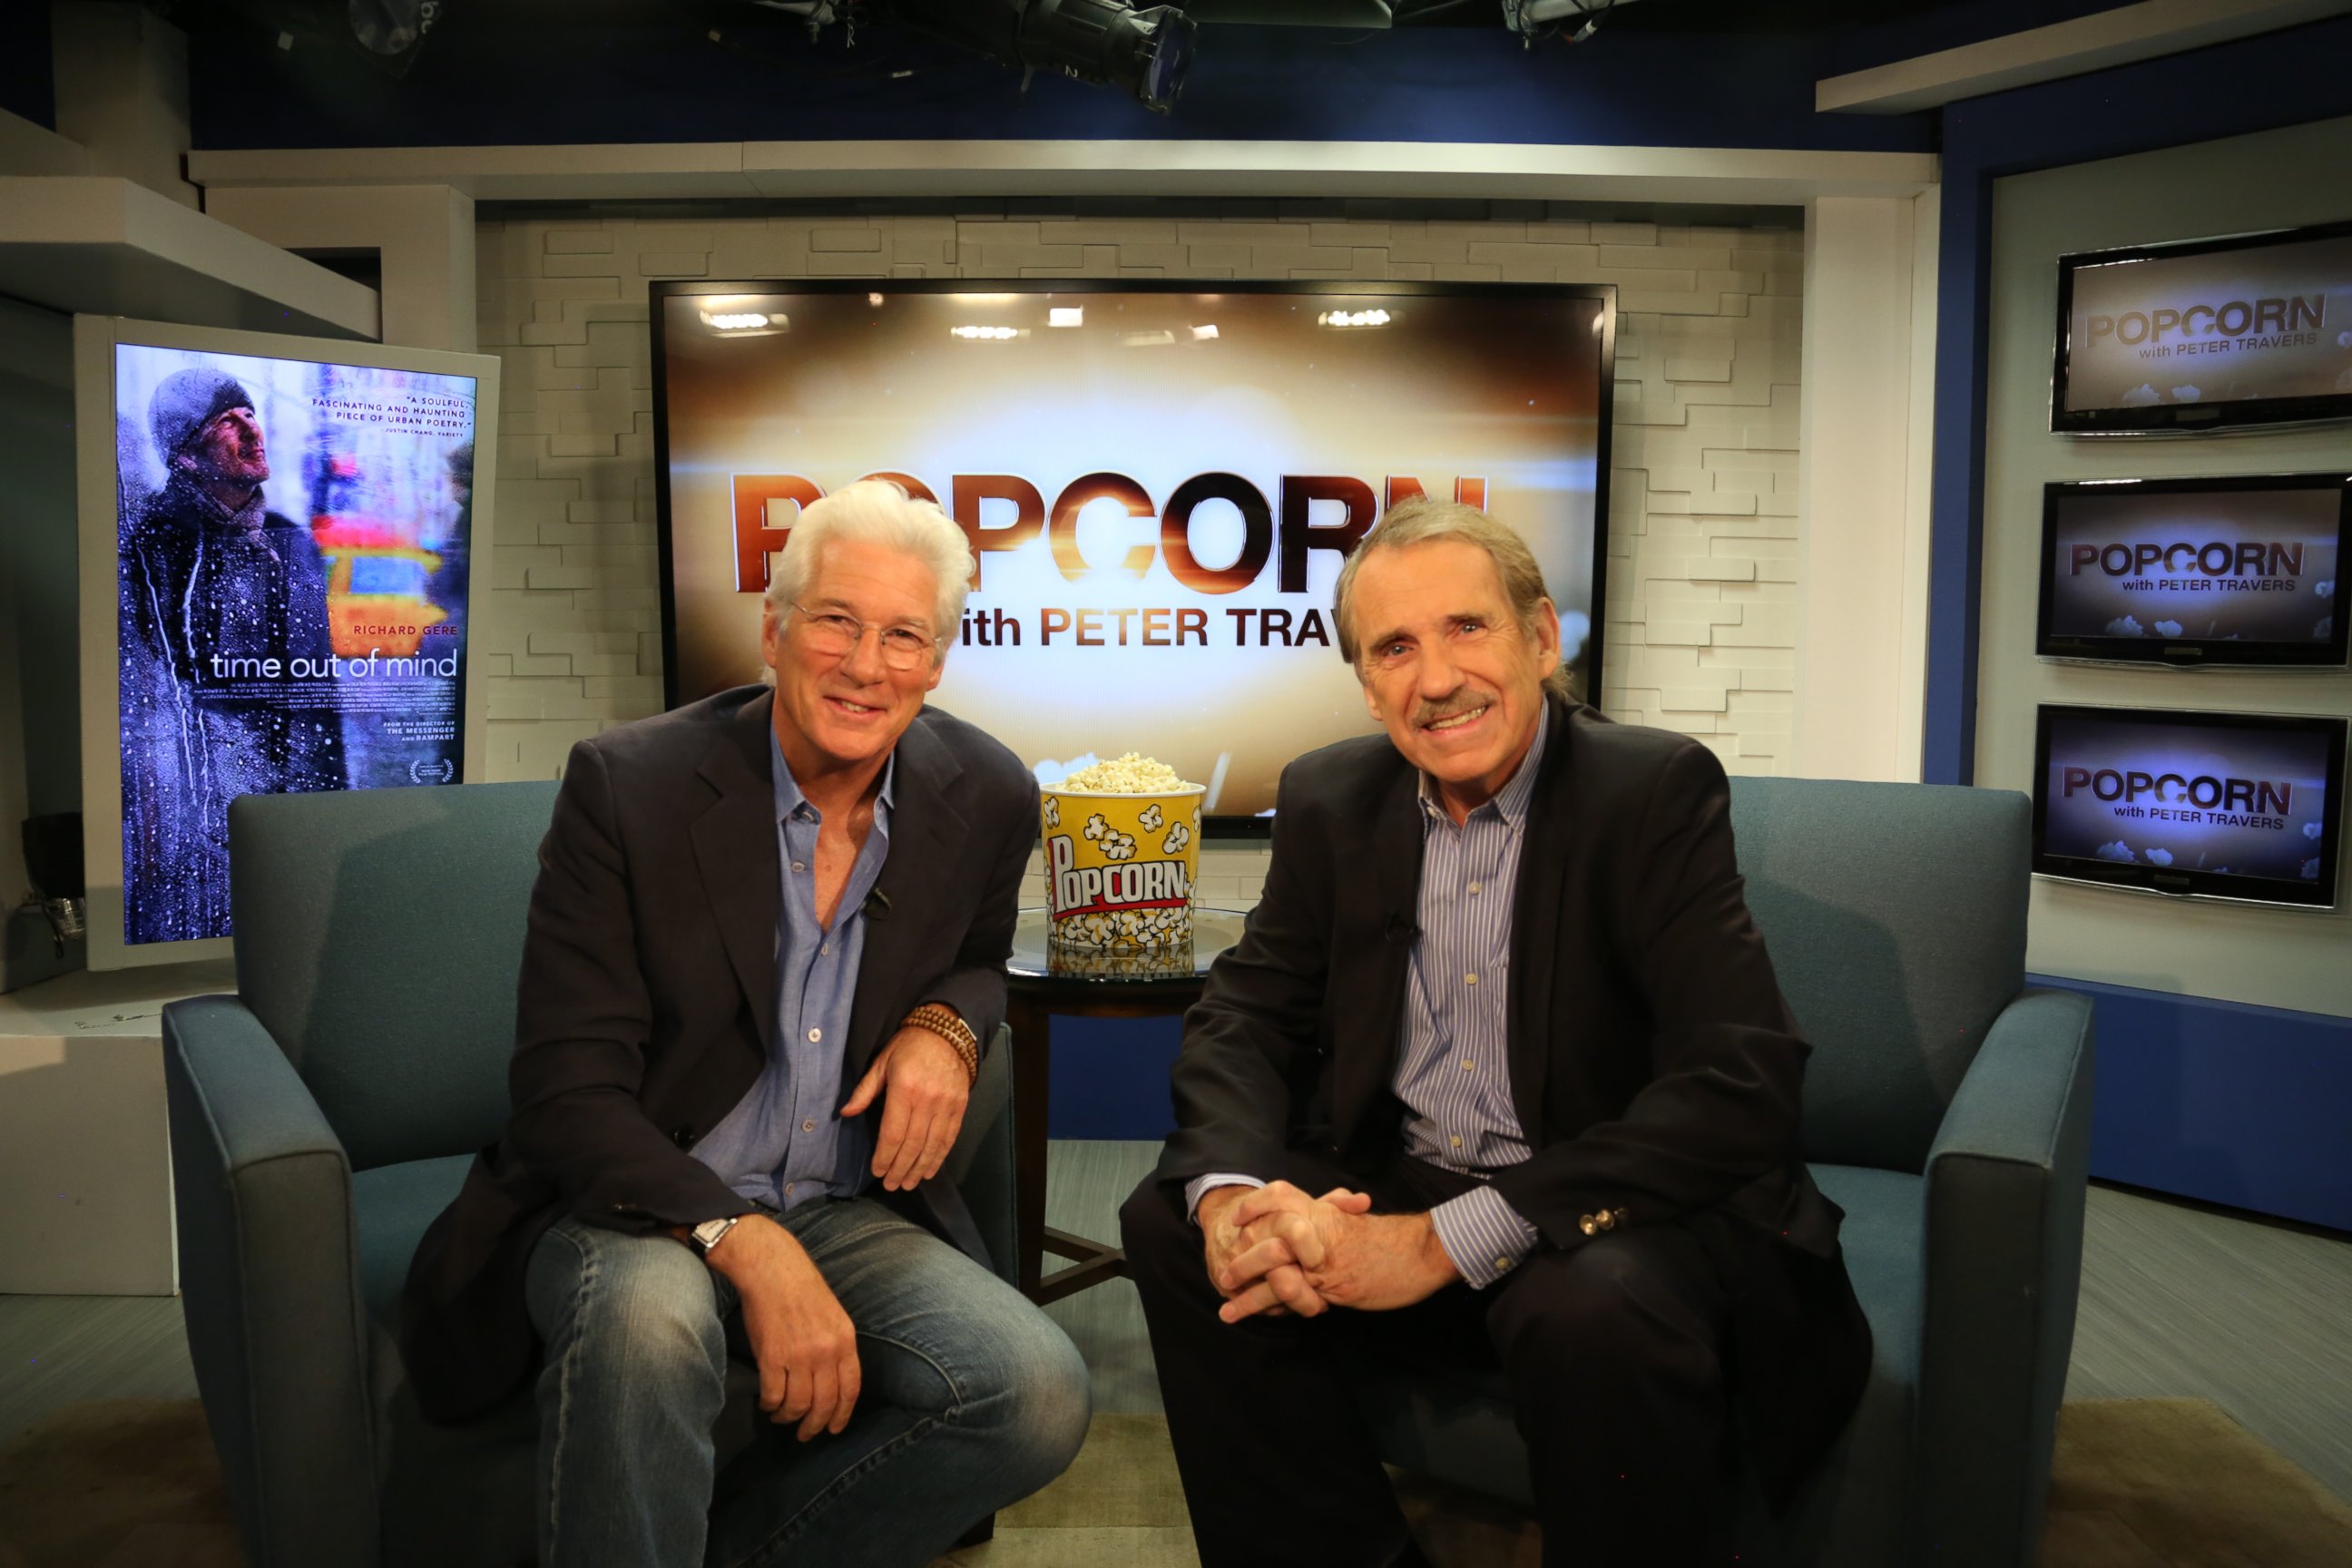 PHOTO:Richard Gere talks about his new movie with Peter Travers.